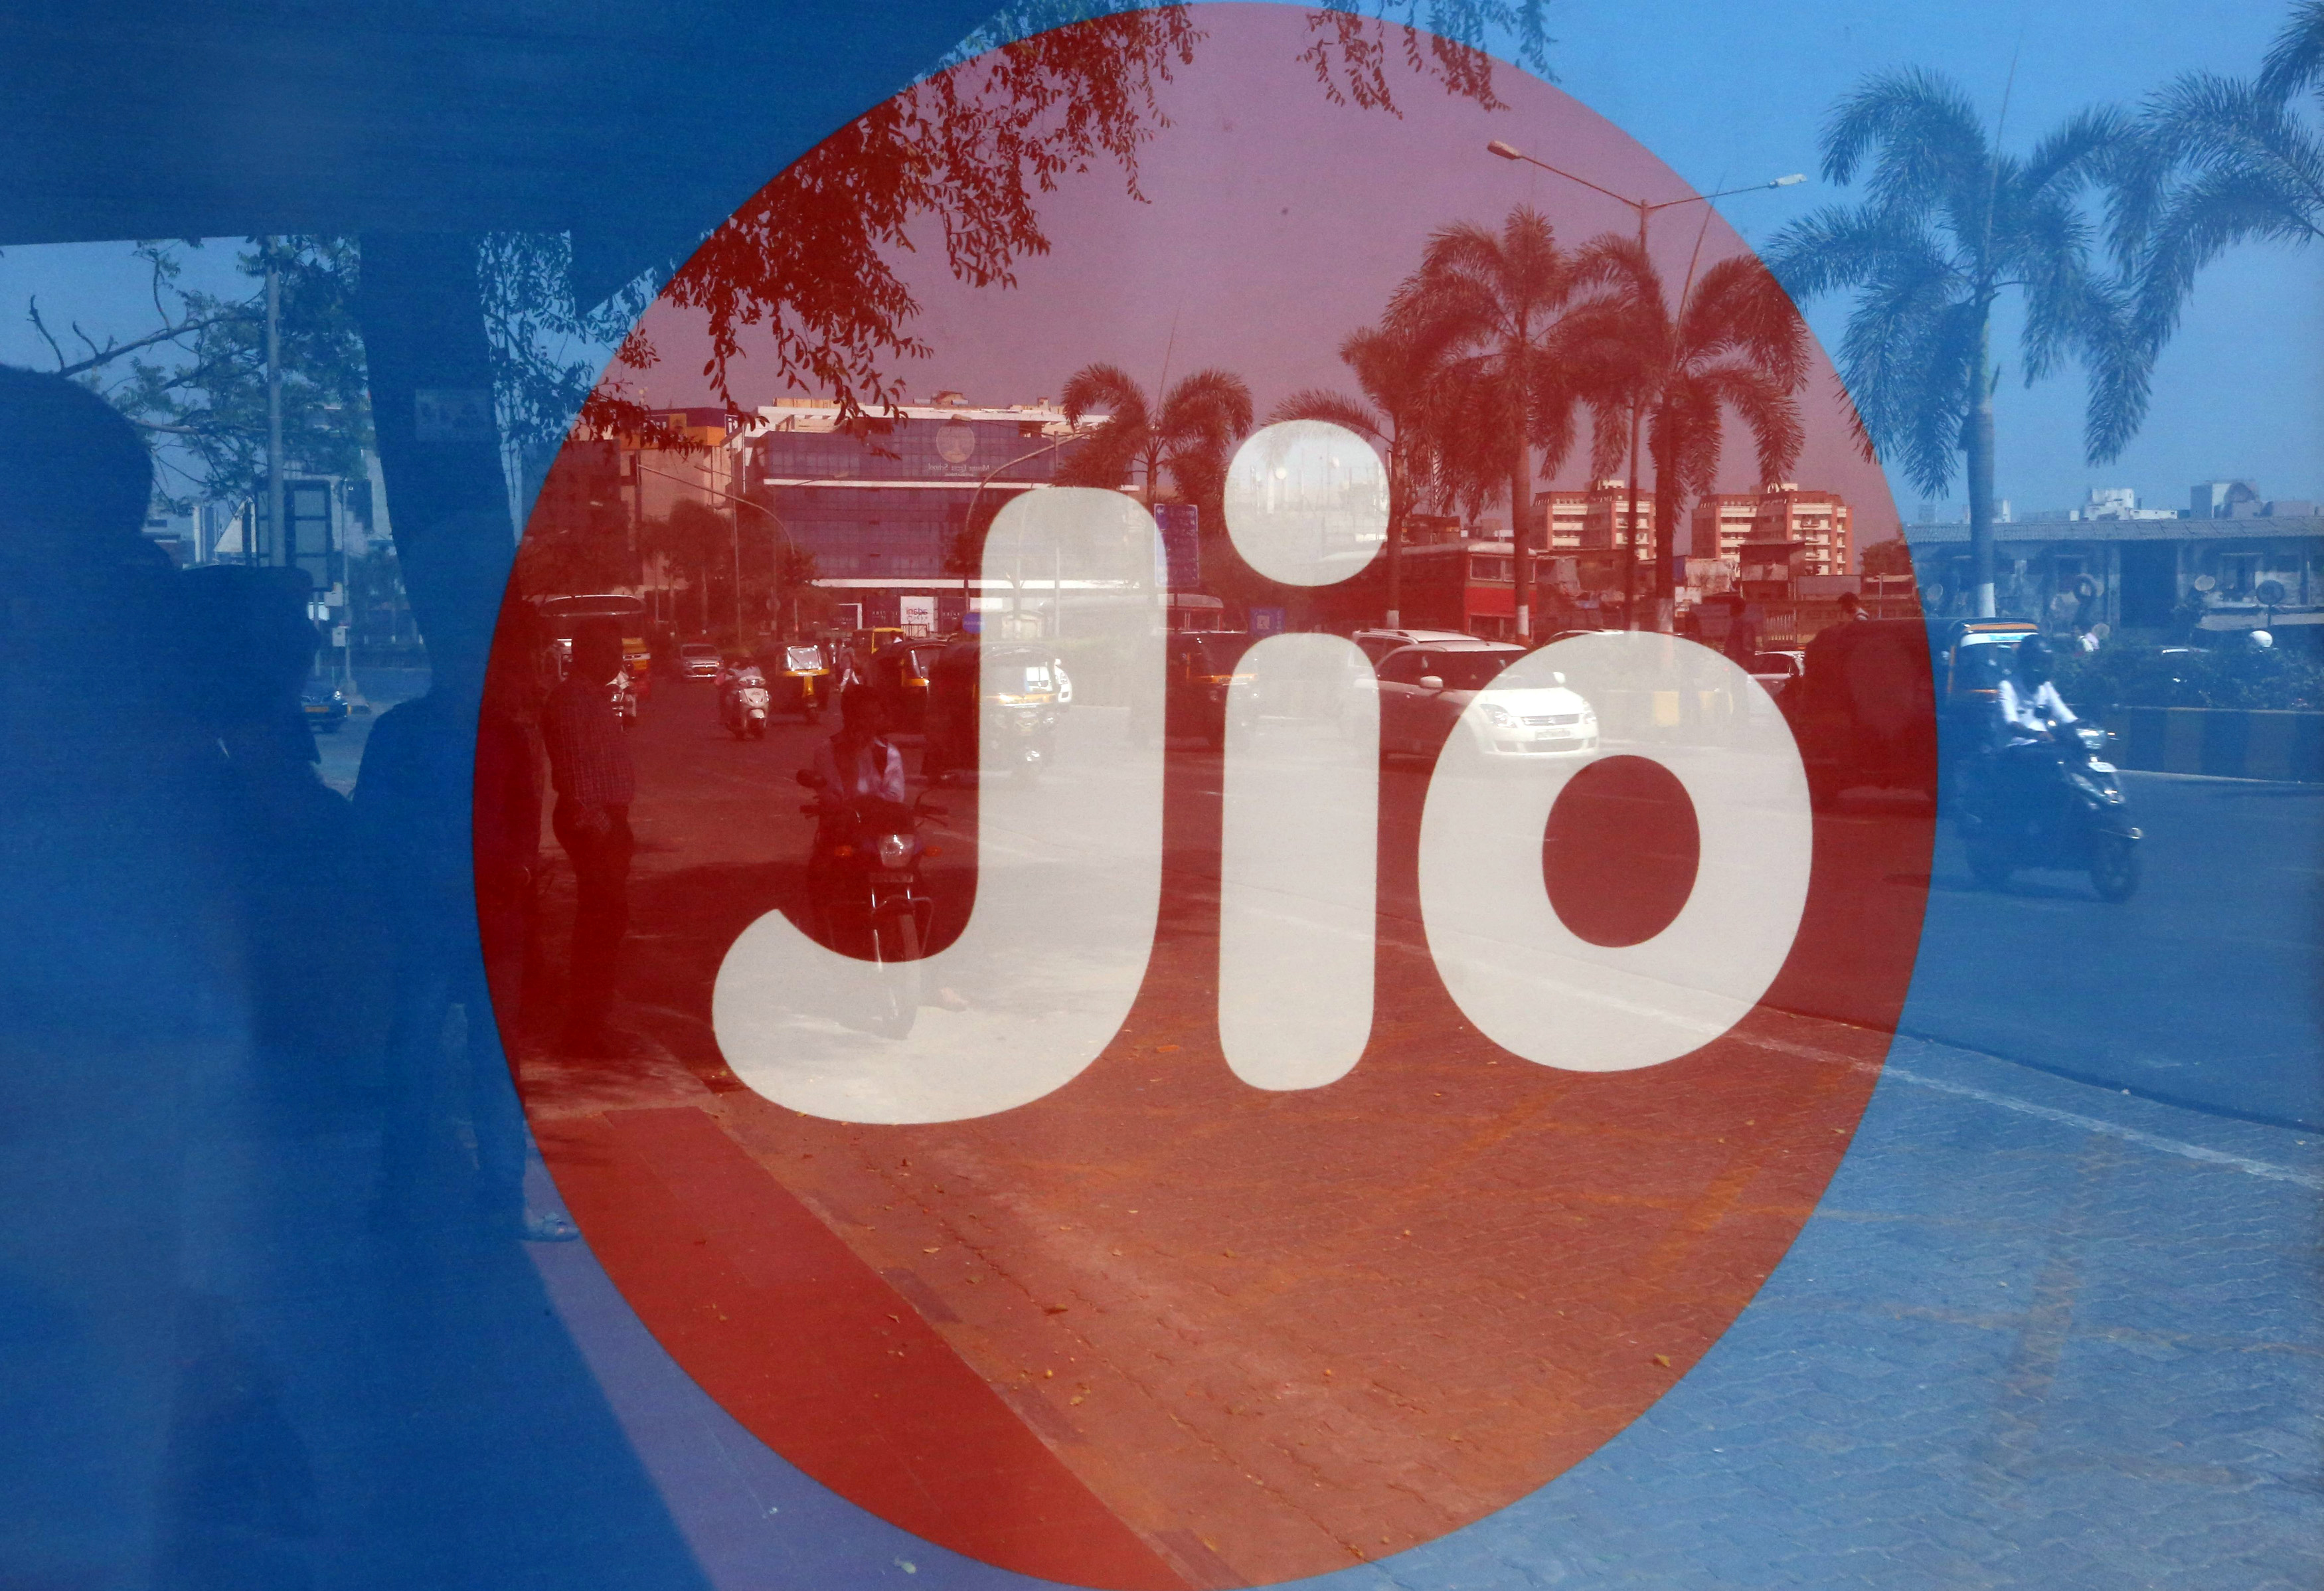 Commuters are reflected on an advertisement of Reliance Industries' Jio telecoms unit, at a bus stop in Mumbai